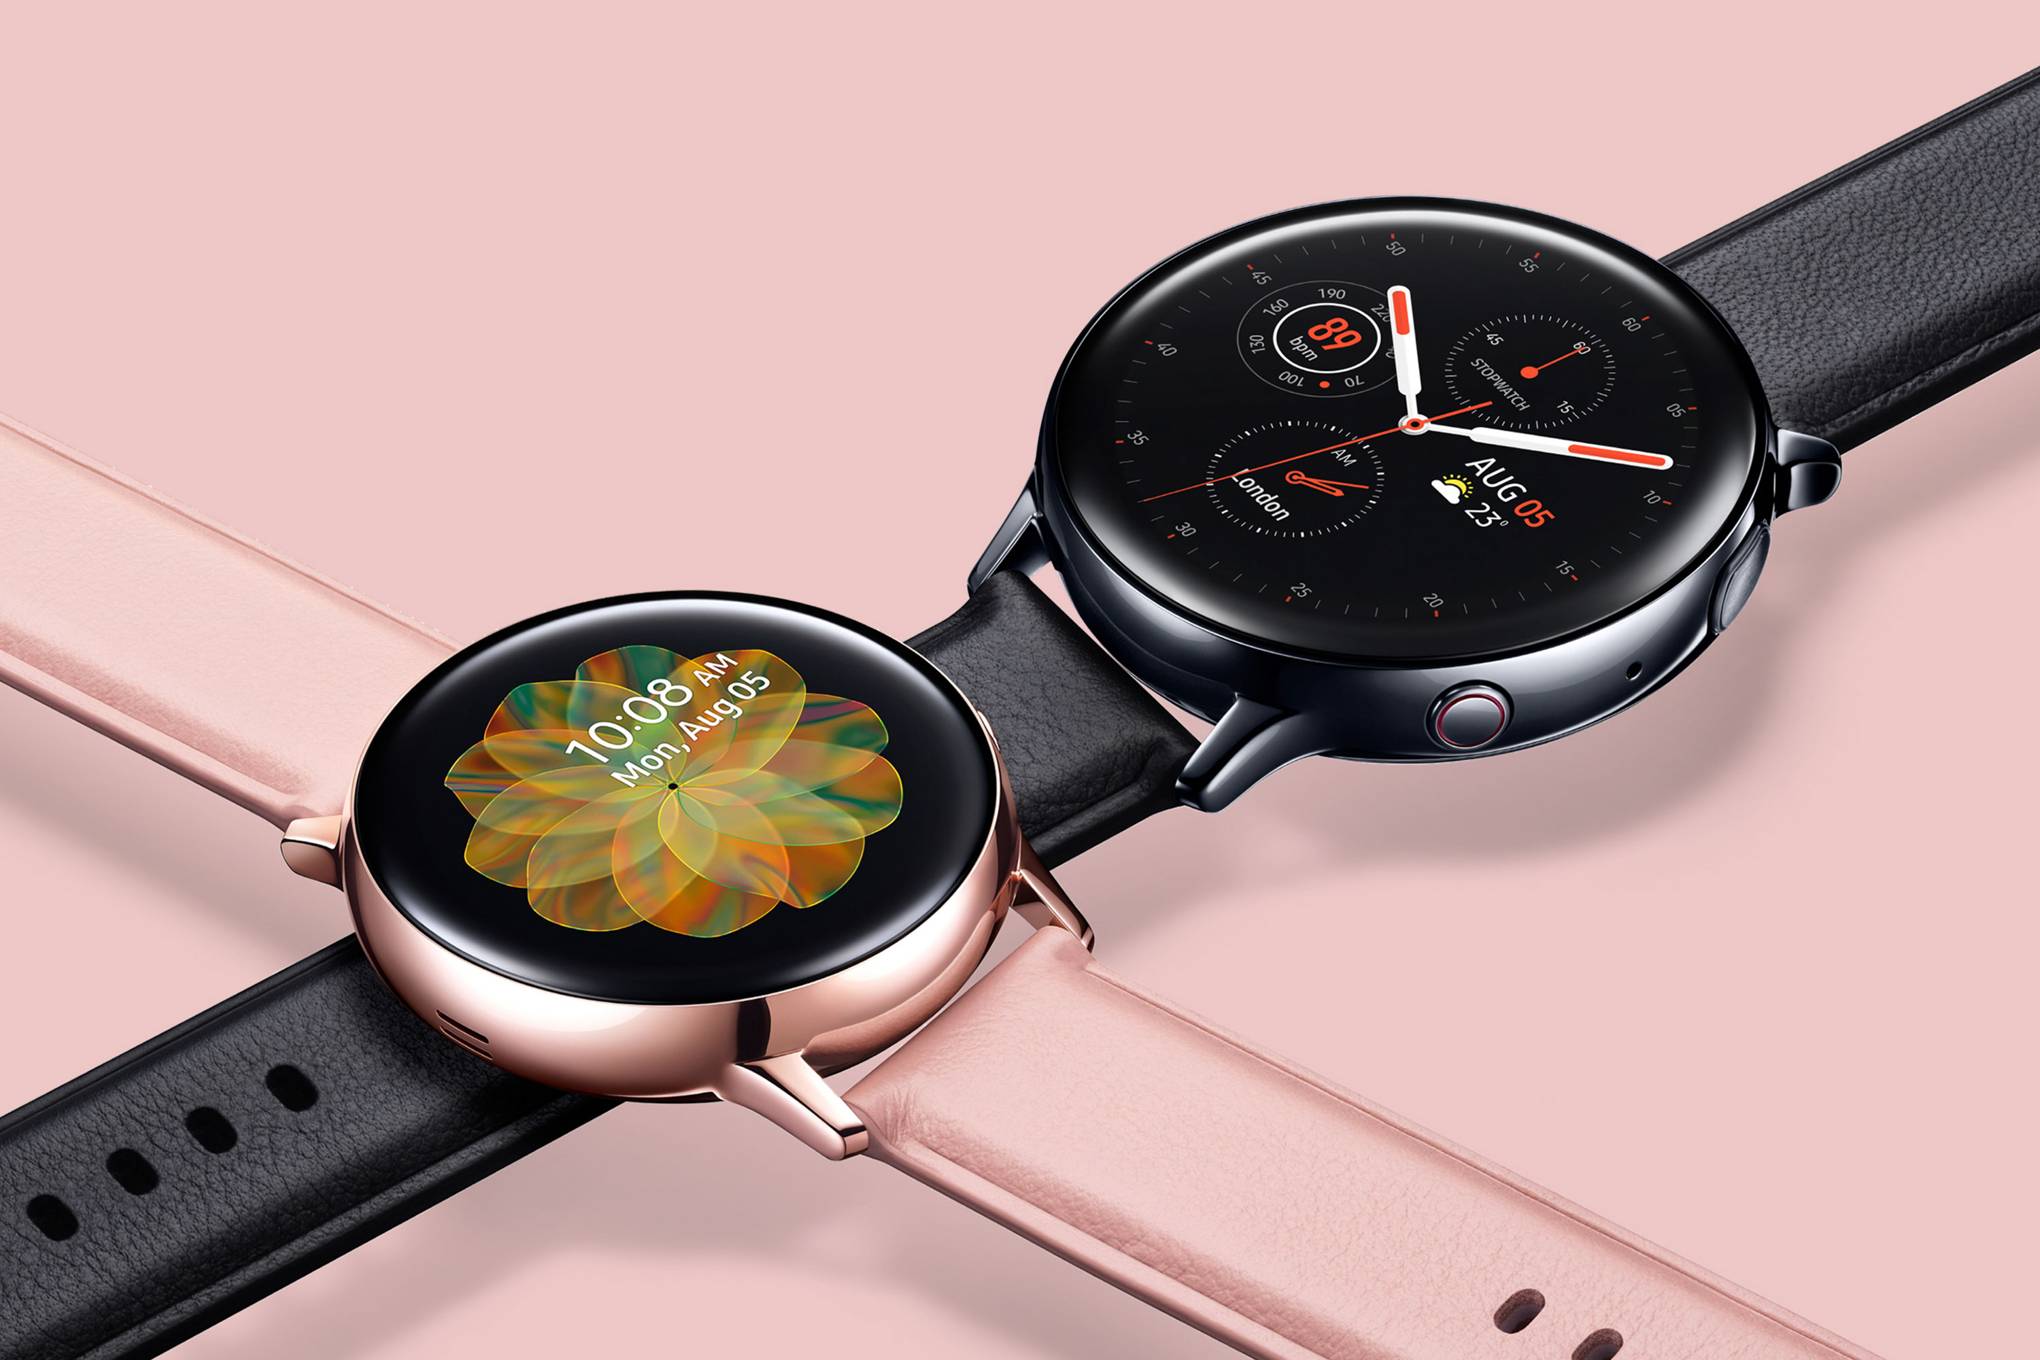 The Galaxy Watch Active 2 is Samsung's 